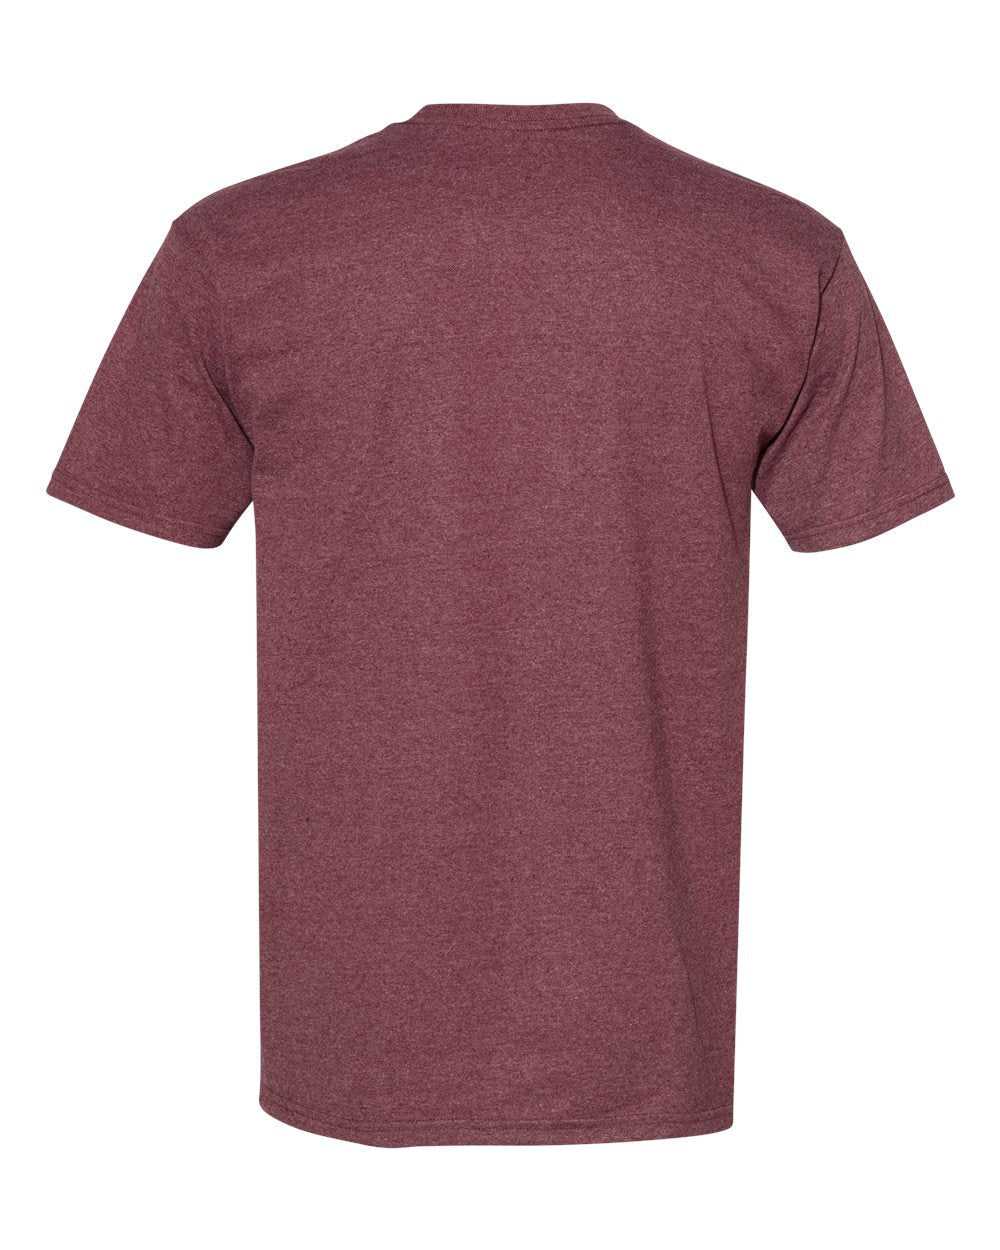 American Apparel 1701 Midweight Cotton Unisex T-Shirt - Burgundy Heather - HIT a Double